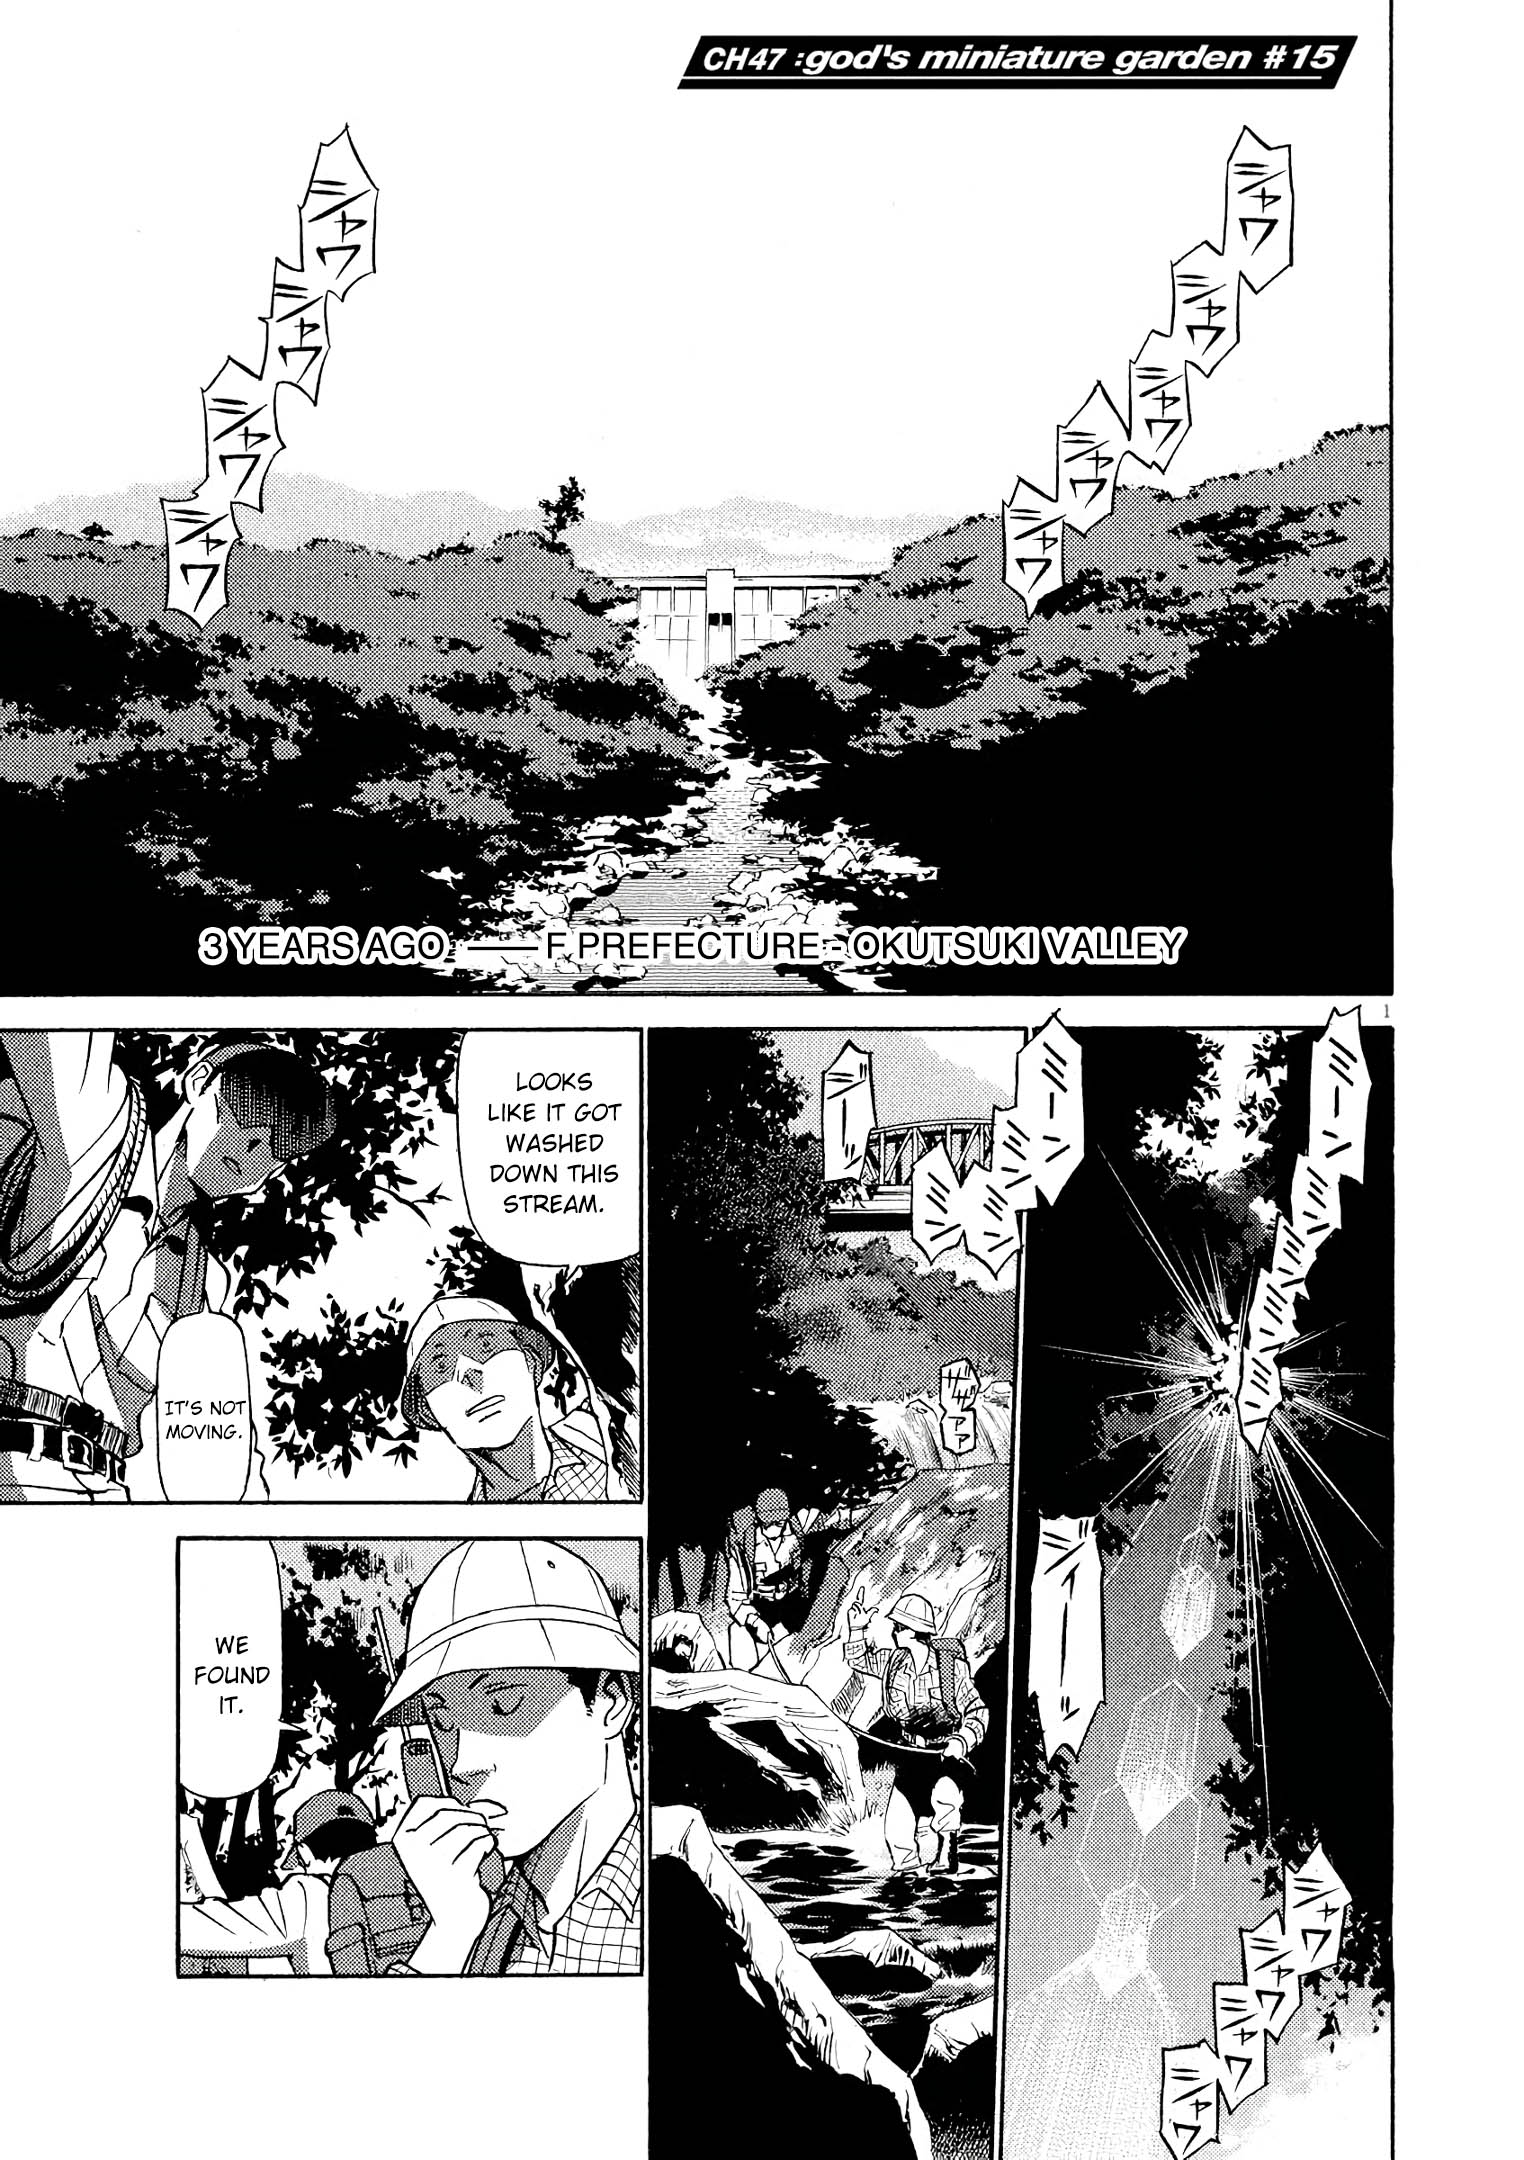 Birdy The Mighty Evolution Vol.5 Chapter 47: God's Miniature Garden #15 - Picture 1